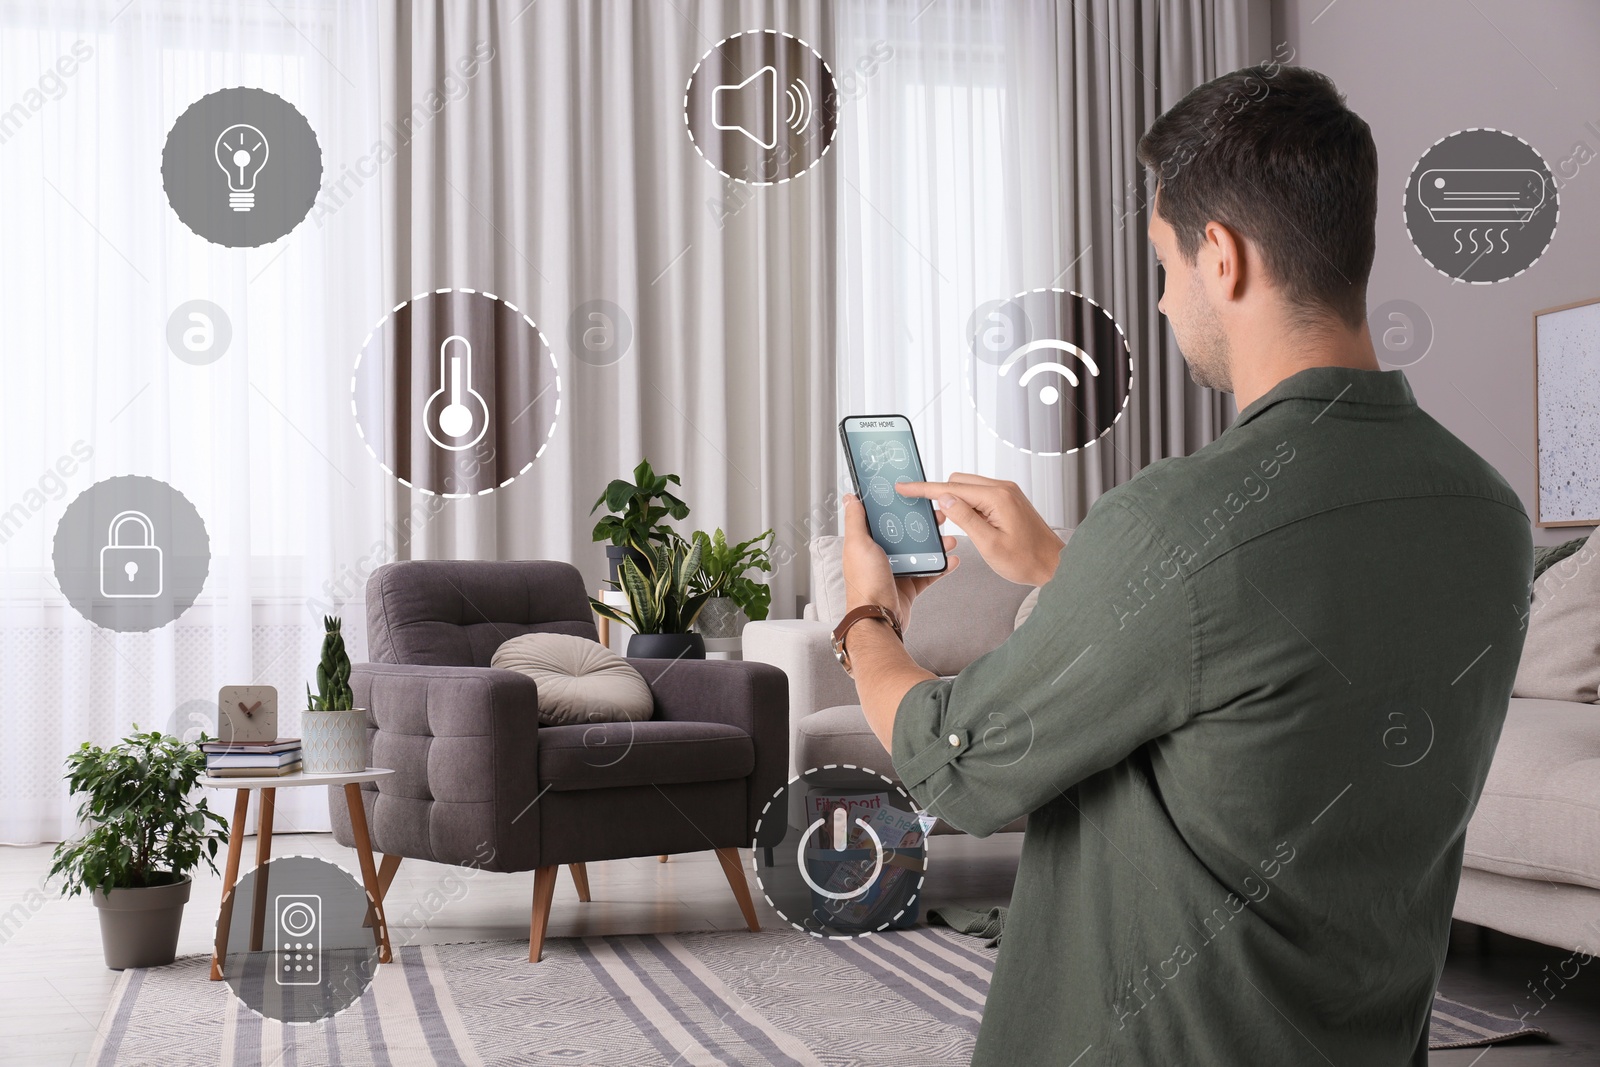 Image of Man using smart home control system via application on mobile phone indoors. Different icons around him